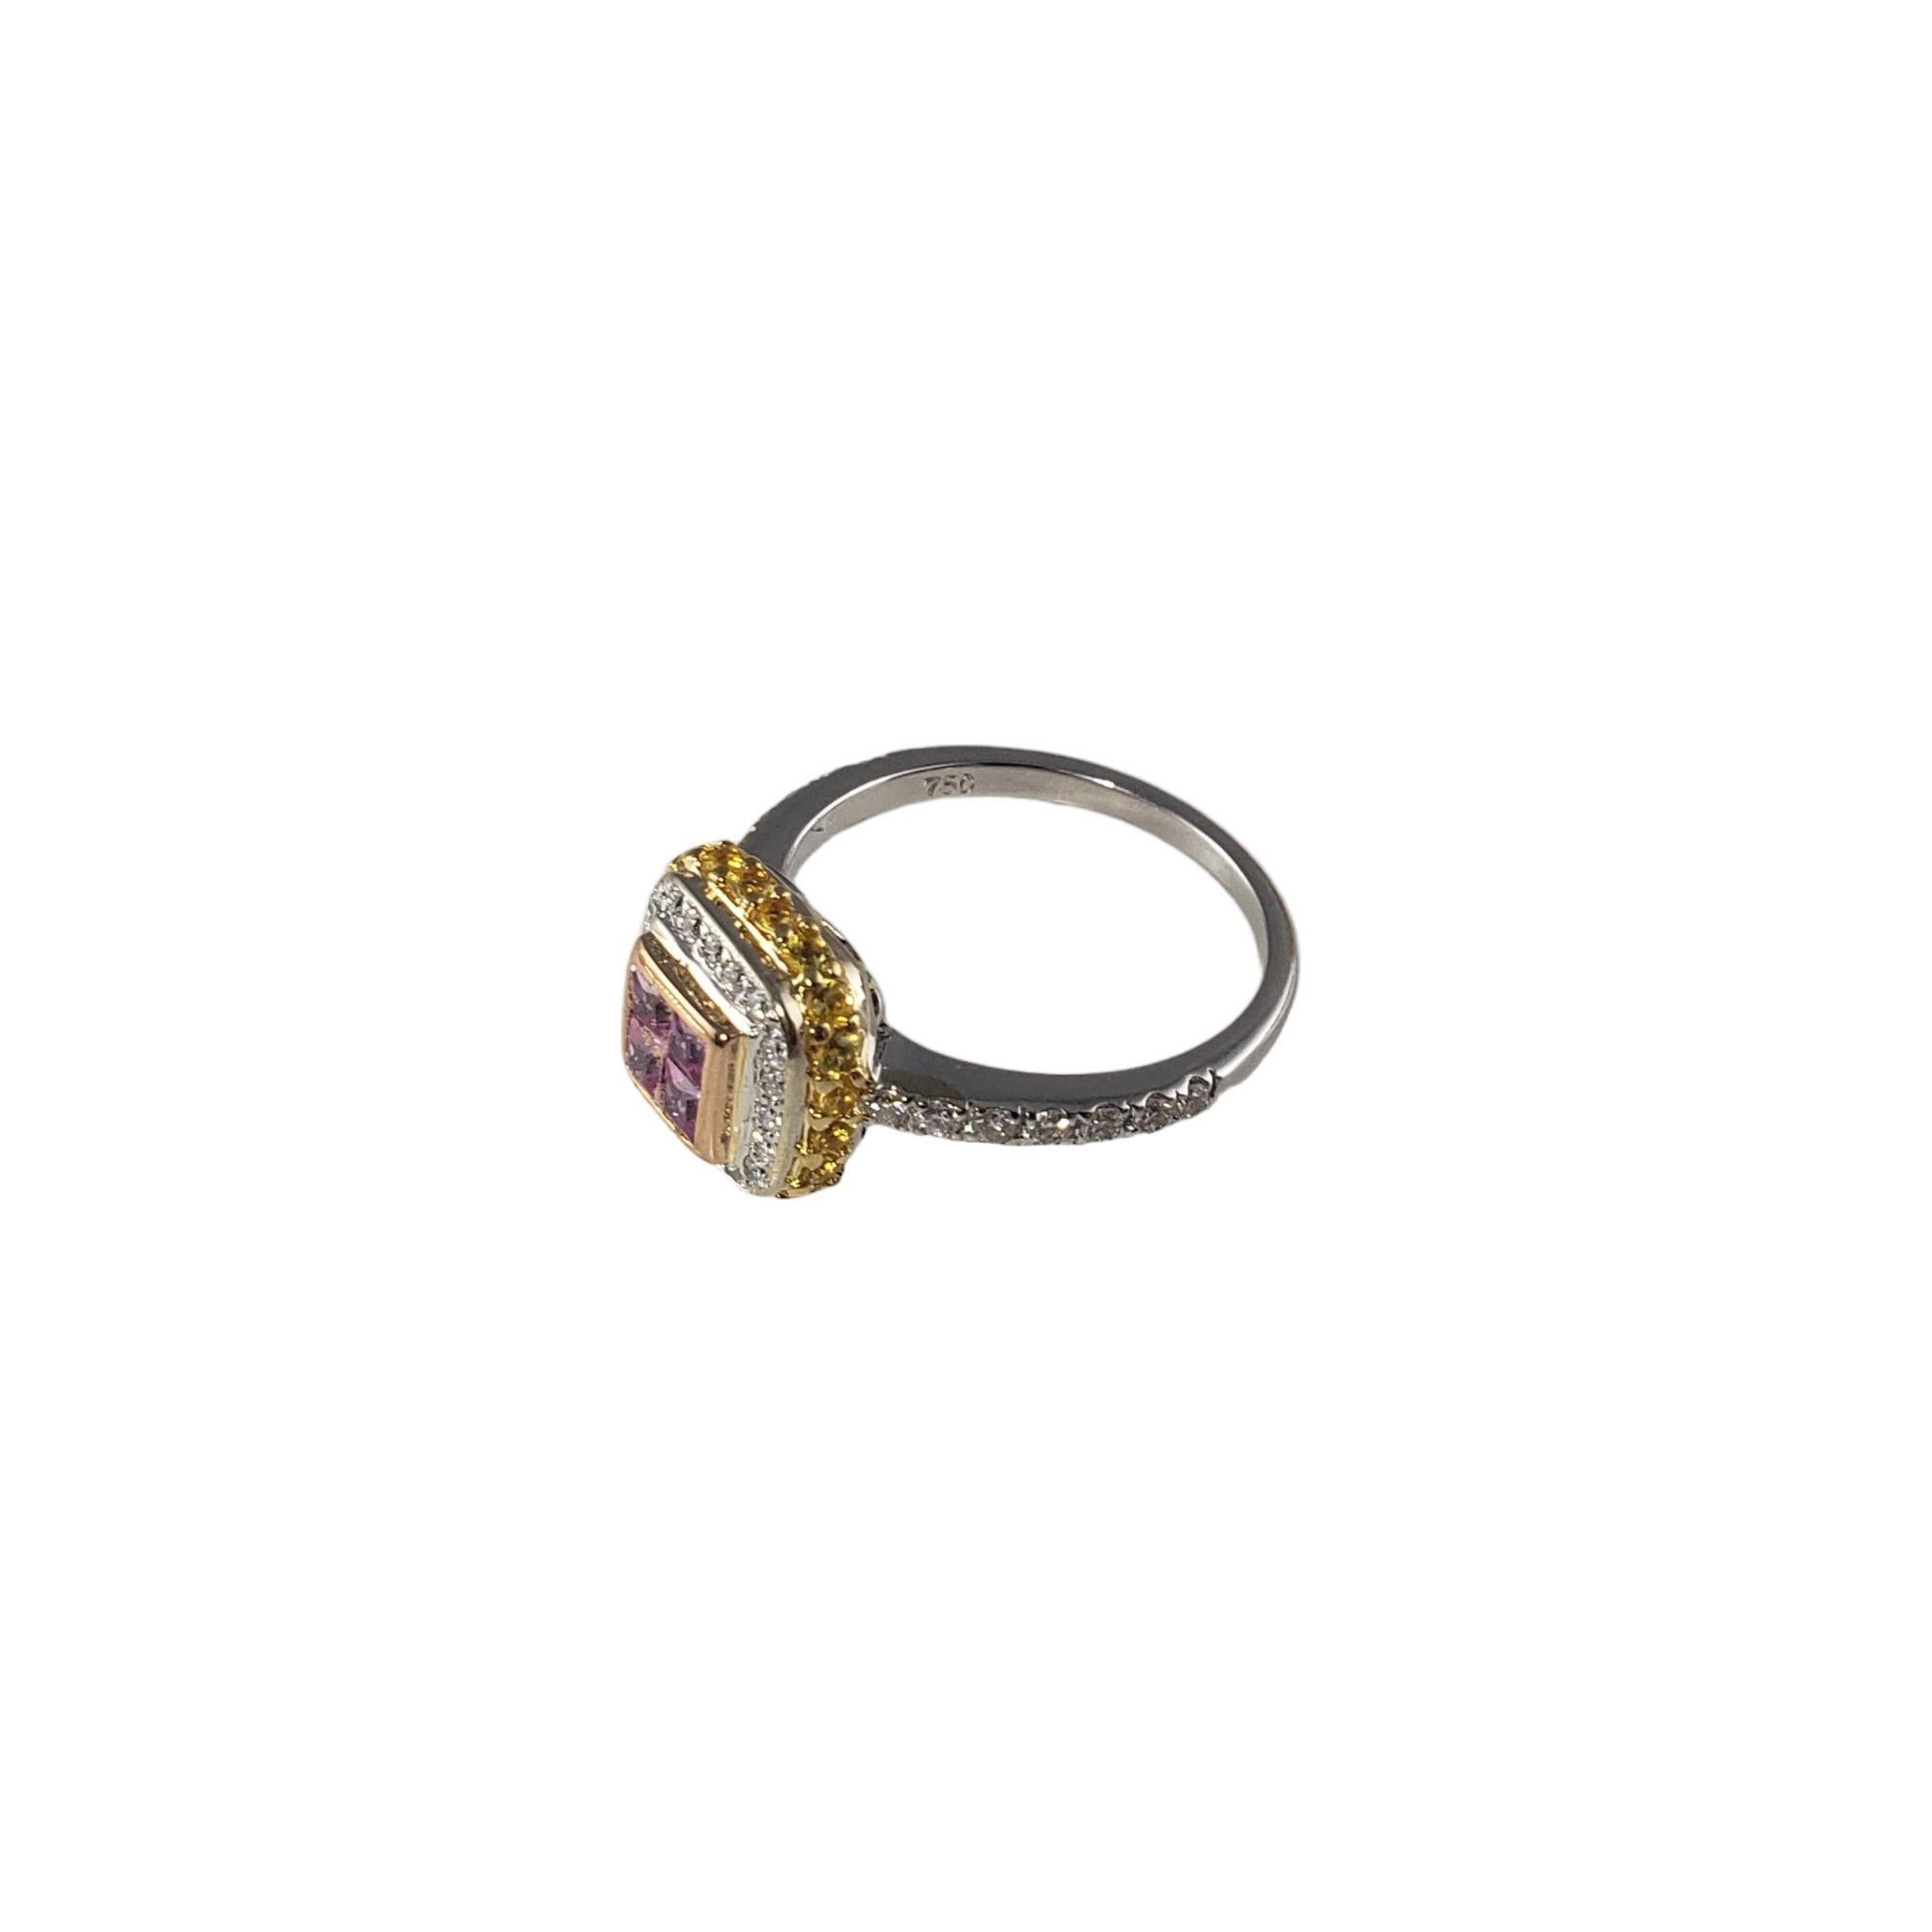 Vintage 18 Karat White Gold Pink and Yellow Sapphire and Diamond Ring Size 7 JAGi Certified-

This stunning ring features four square cut pink sapphires, 15 round yellow sapphires, and 34 round brilliant cut diamonds set in beautifully detailed 18K